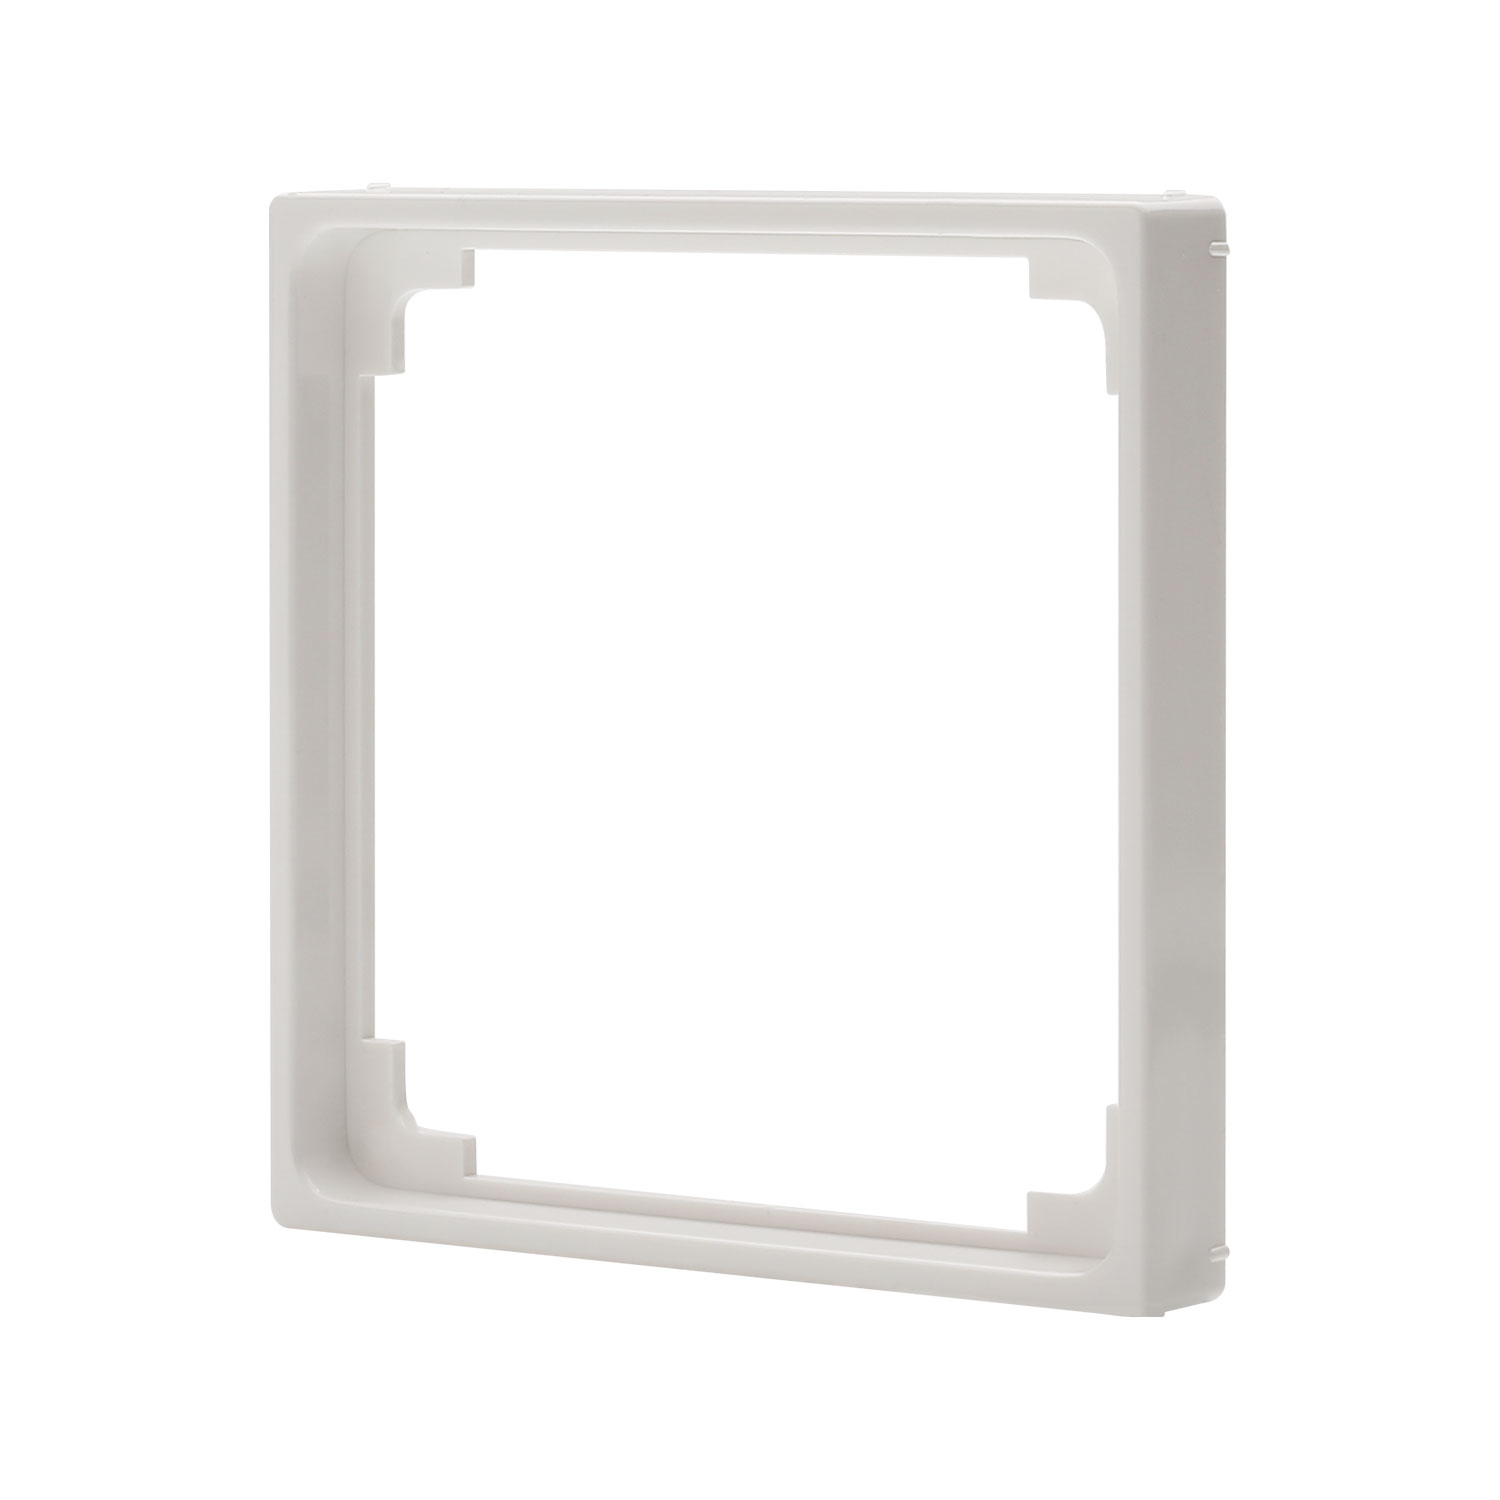 Adapter frame -> switch frame 55x55 , scale: 50x50 mm, plastic, colour: white